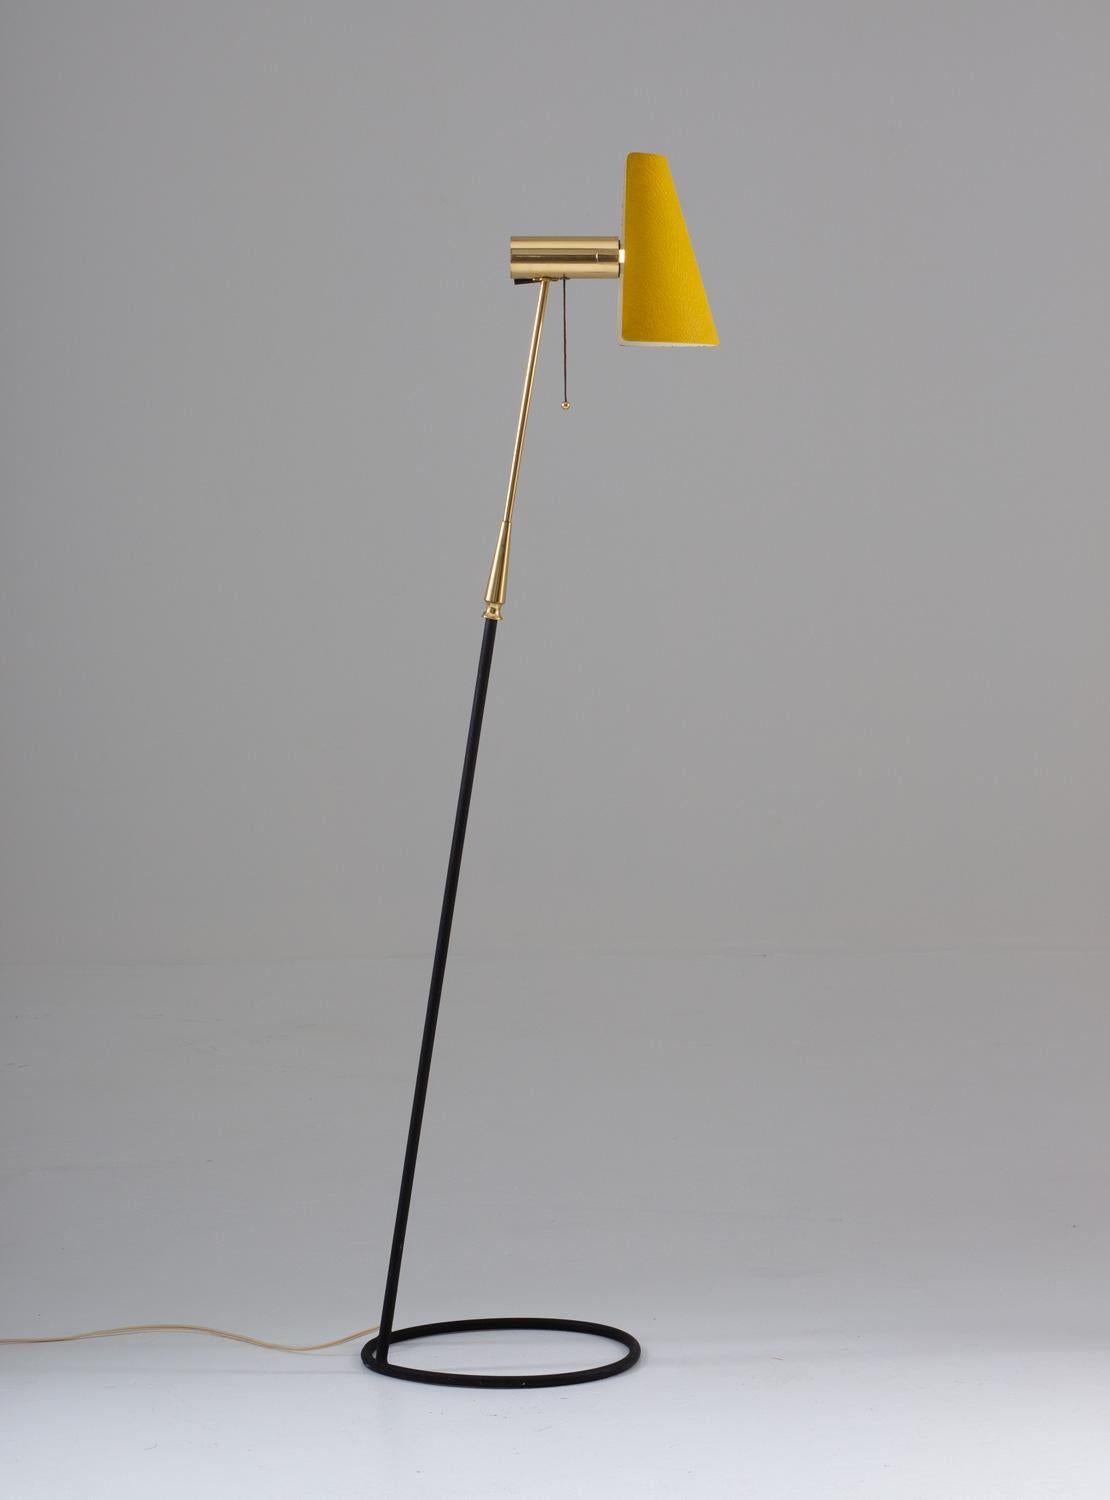 Lovely floor lamp in brass and metal, model 7071 by Swedish manufacturer Falkenbergs, circa 1950.
The lampshade is adjustable, making it a perfect reading lamp beside the sofa.
Condition: Very good original condition.